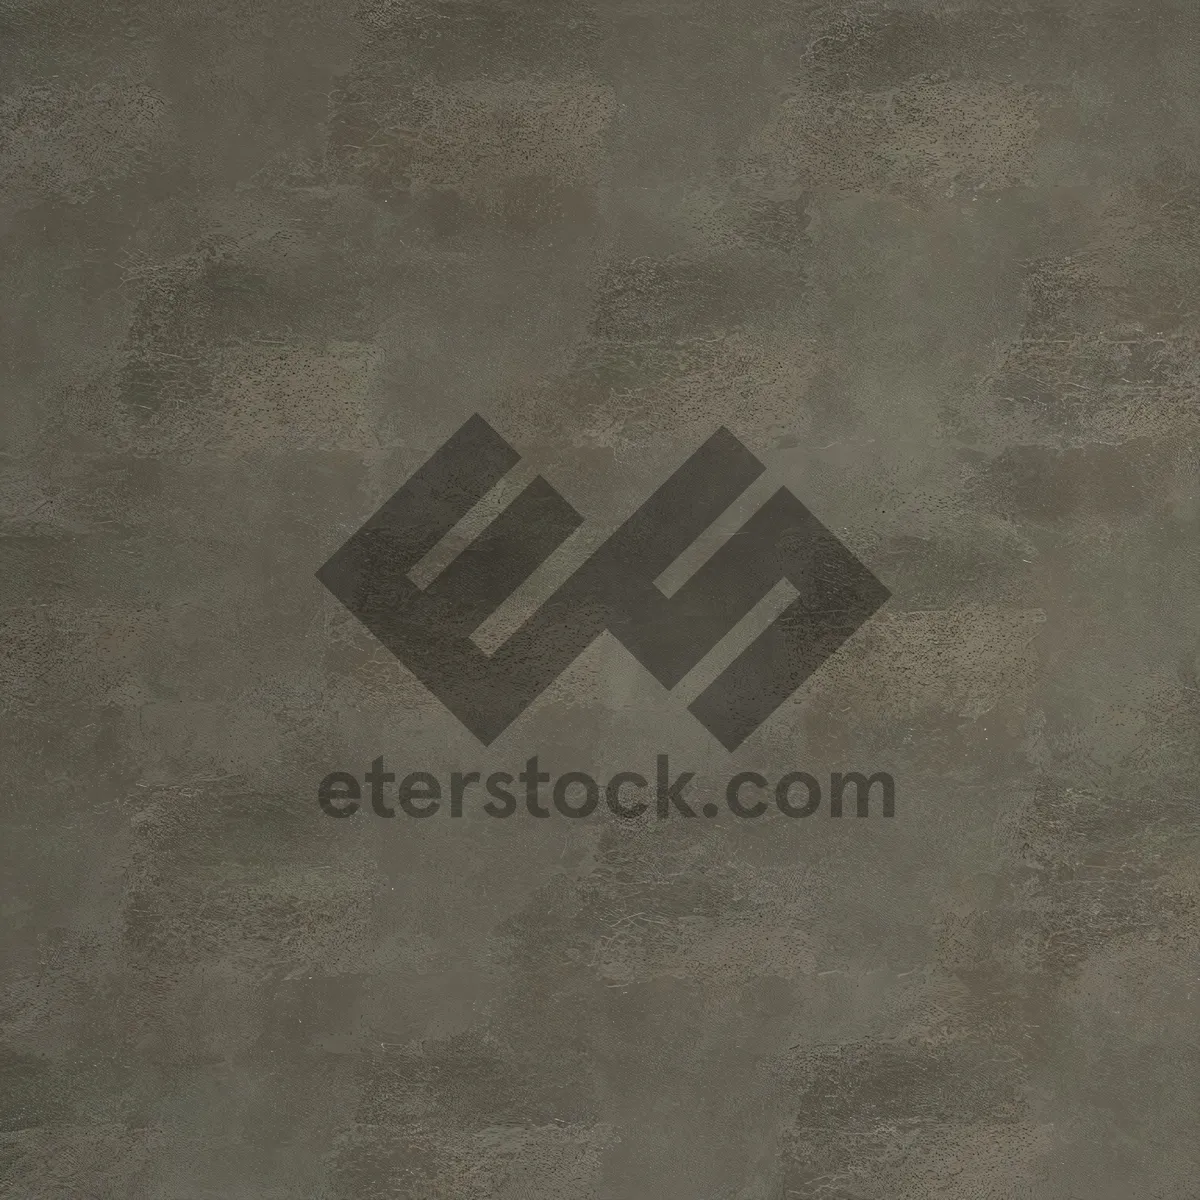 Picture of Vintage Grunge Burlap Wall Texture